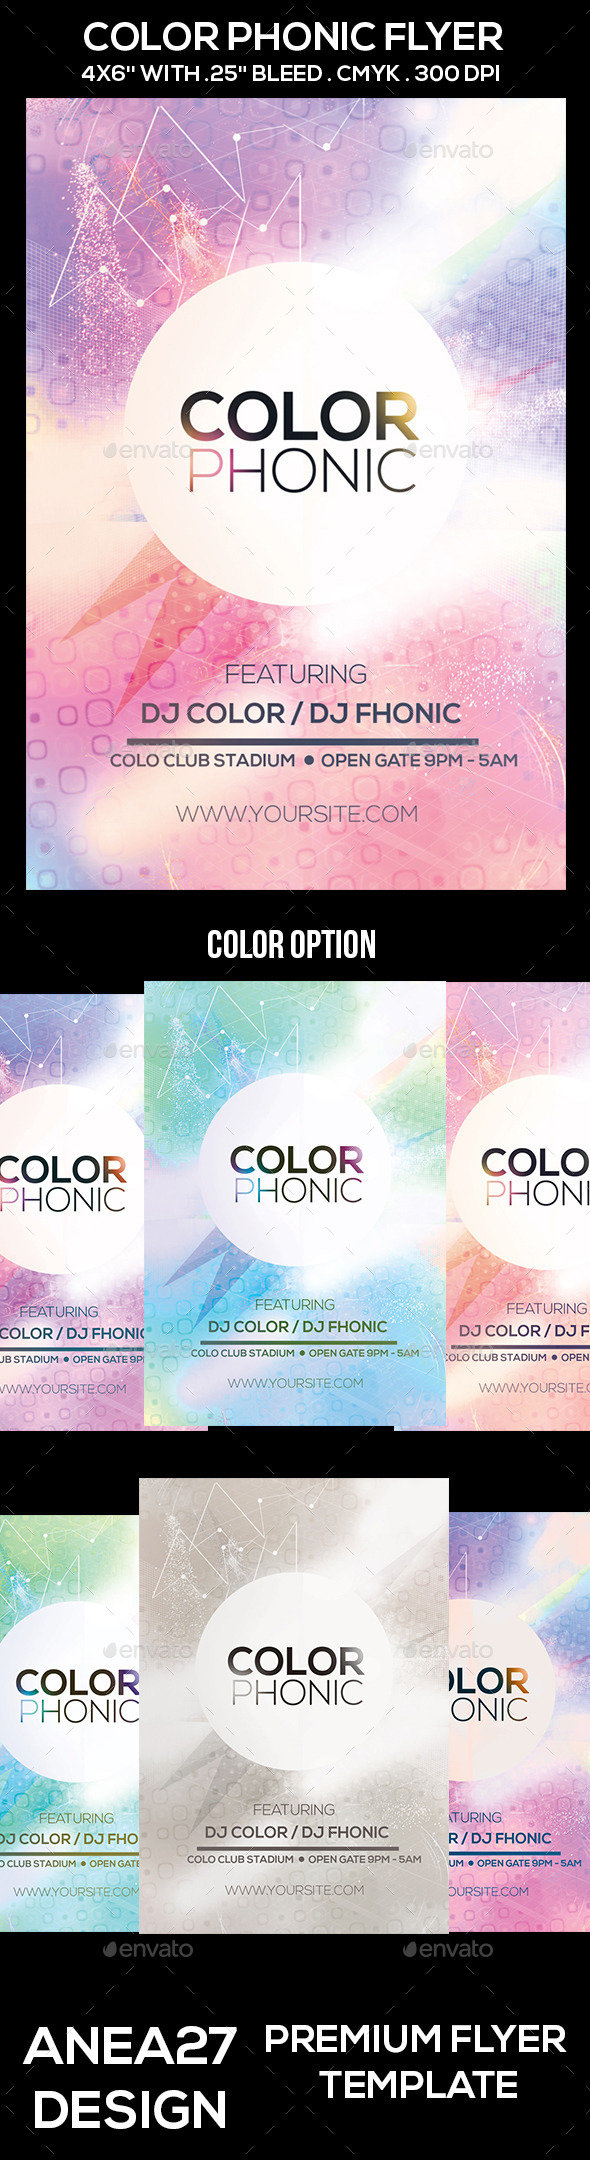 Color Phonic Flyer